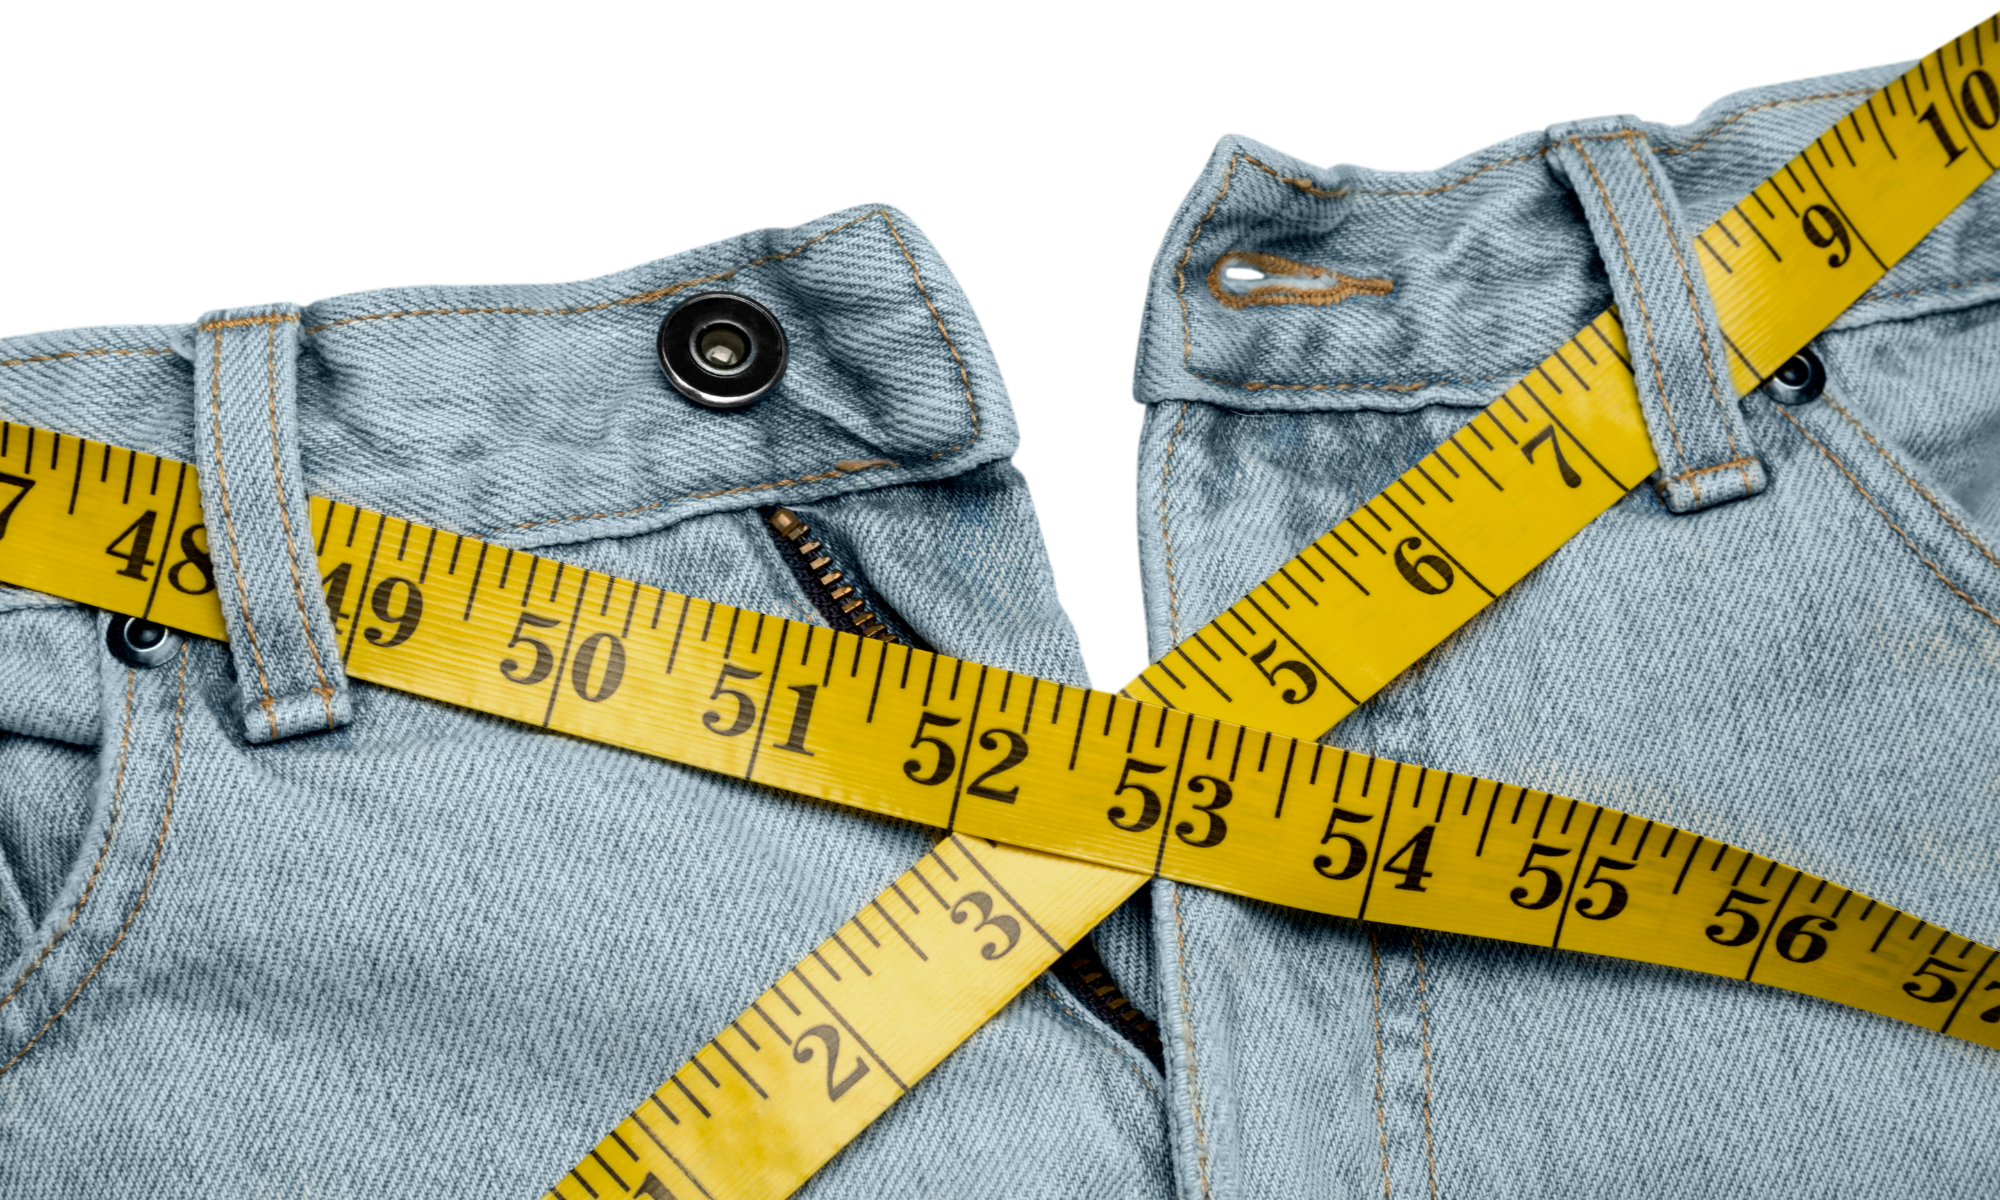 A pair of jeans with a measuring tape threaded through the belt loops